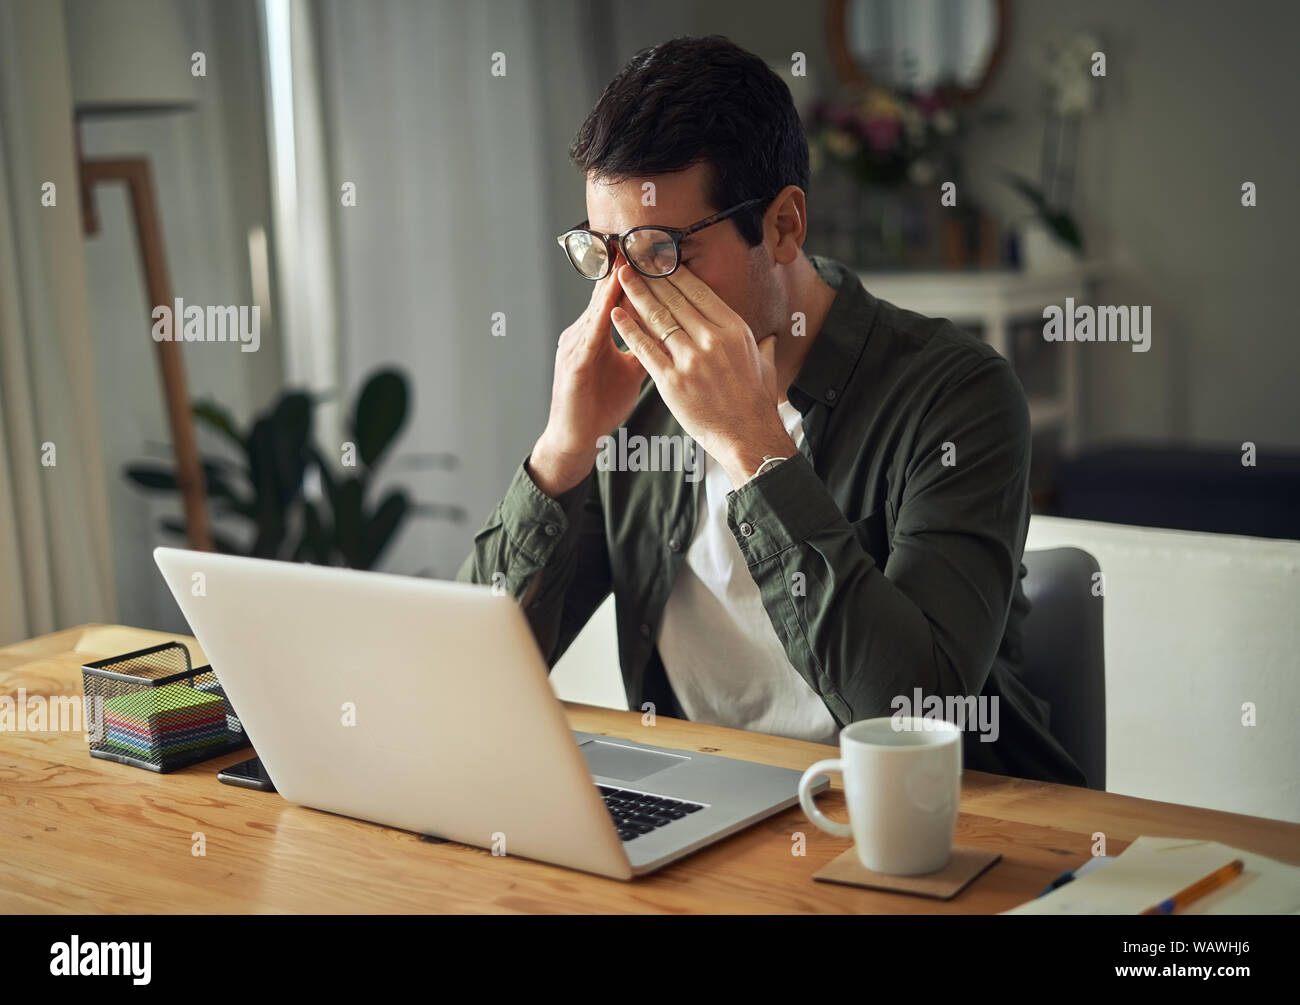 Man having stressful time working on laptop at home Stock Photo